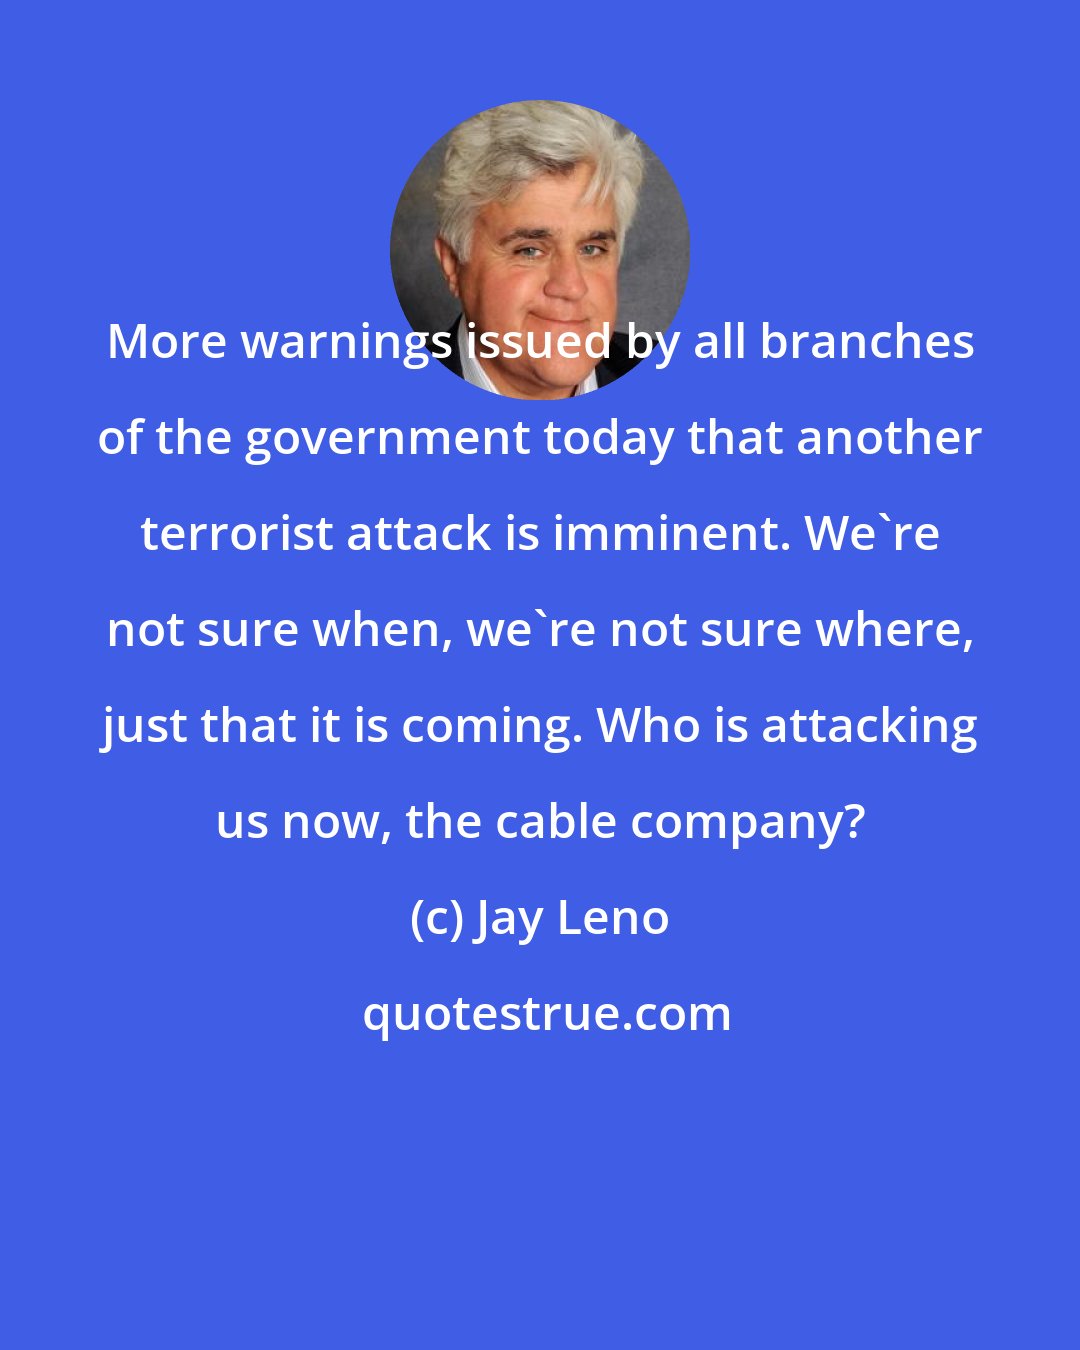 Jay Leno: More warnings issued by all branches of the government today that another terrorist attack is imminent. We're not sure when, we're not sure where, just that it is coming. Who is attacking us now, the cable company?